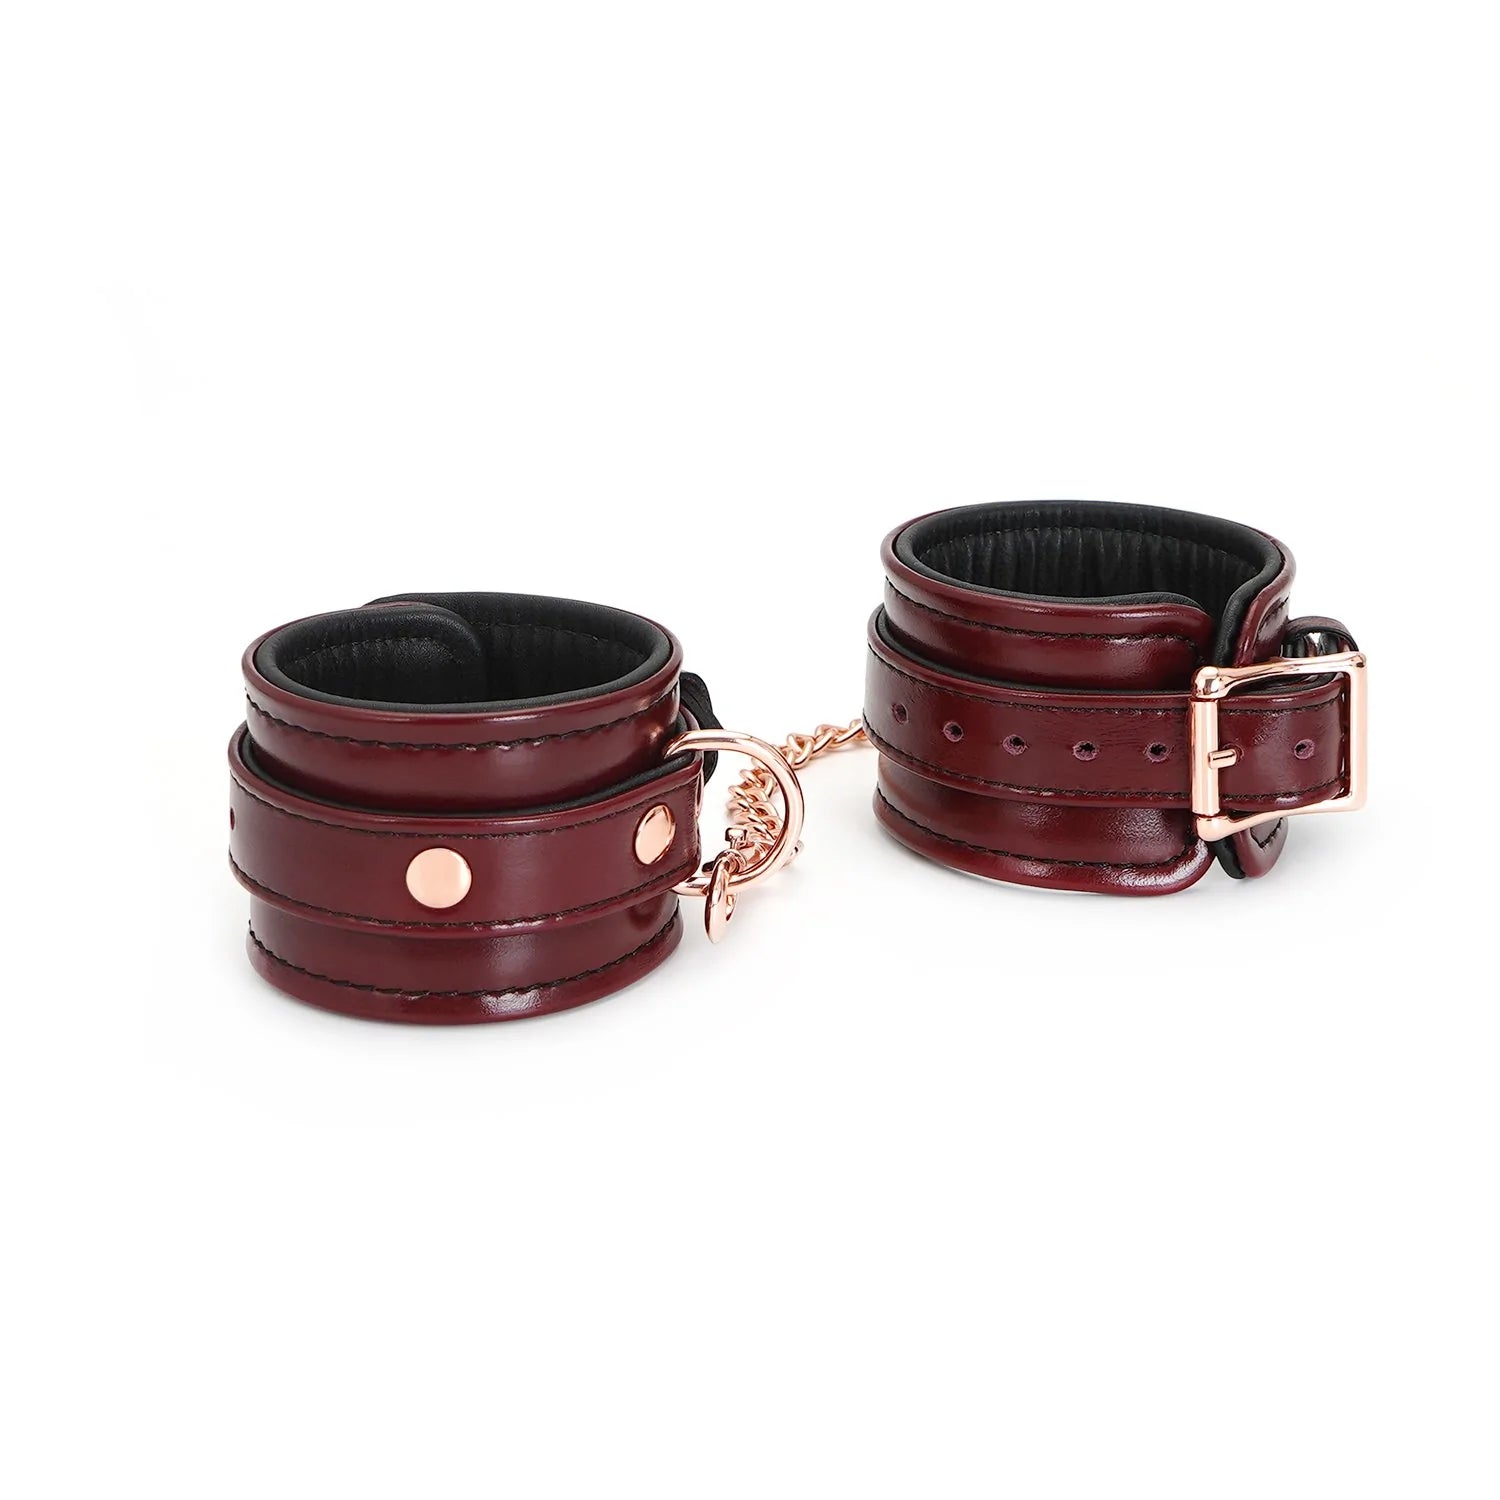 Leather Wrist cuffs with Rose Gold Hardware by Liebe Seele